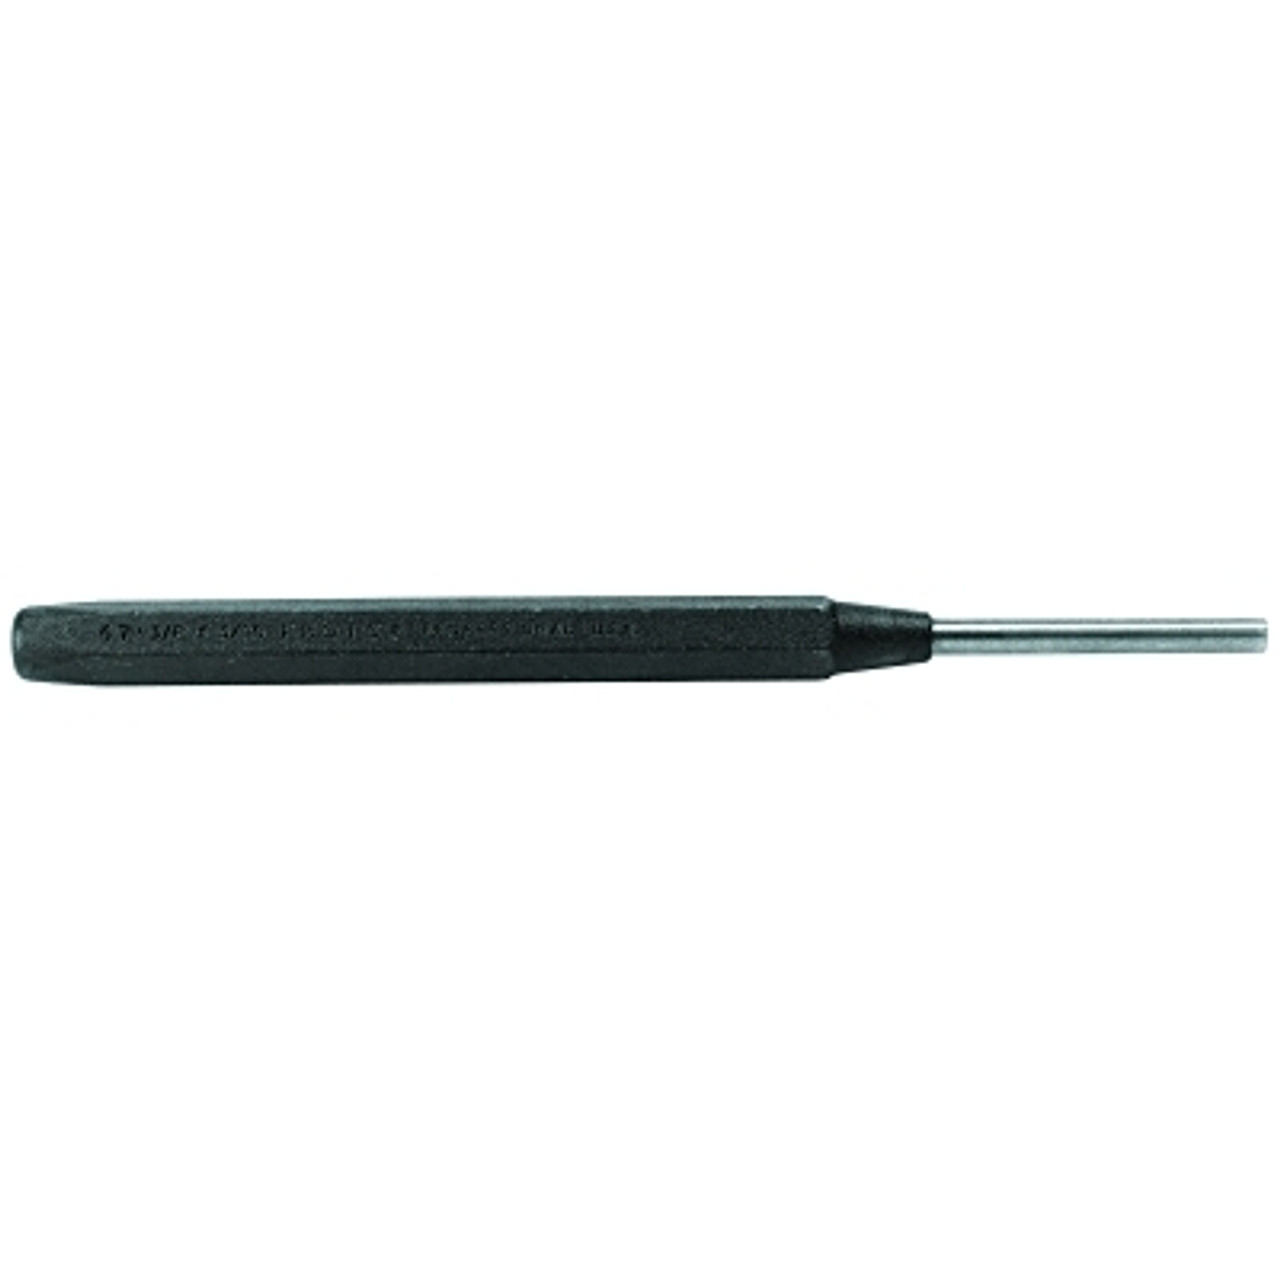 915042-7 Proto Drive Pin Punch: 1/8 in Tip Size, 5/16 in Shank Wd, 4 3/4 in  Overall Lg, Hexagon, Flat, SAE